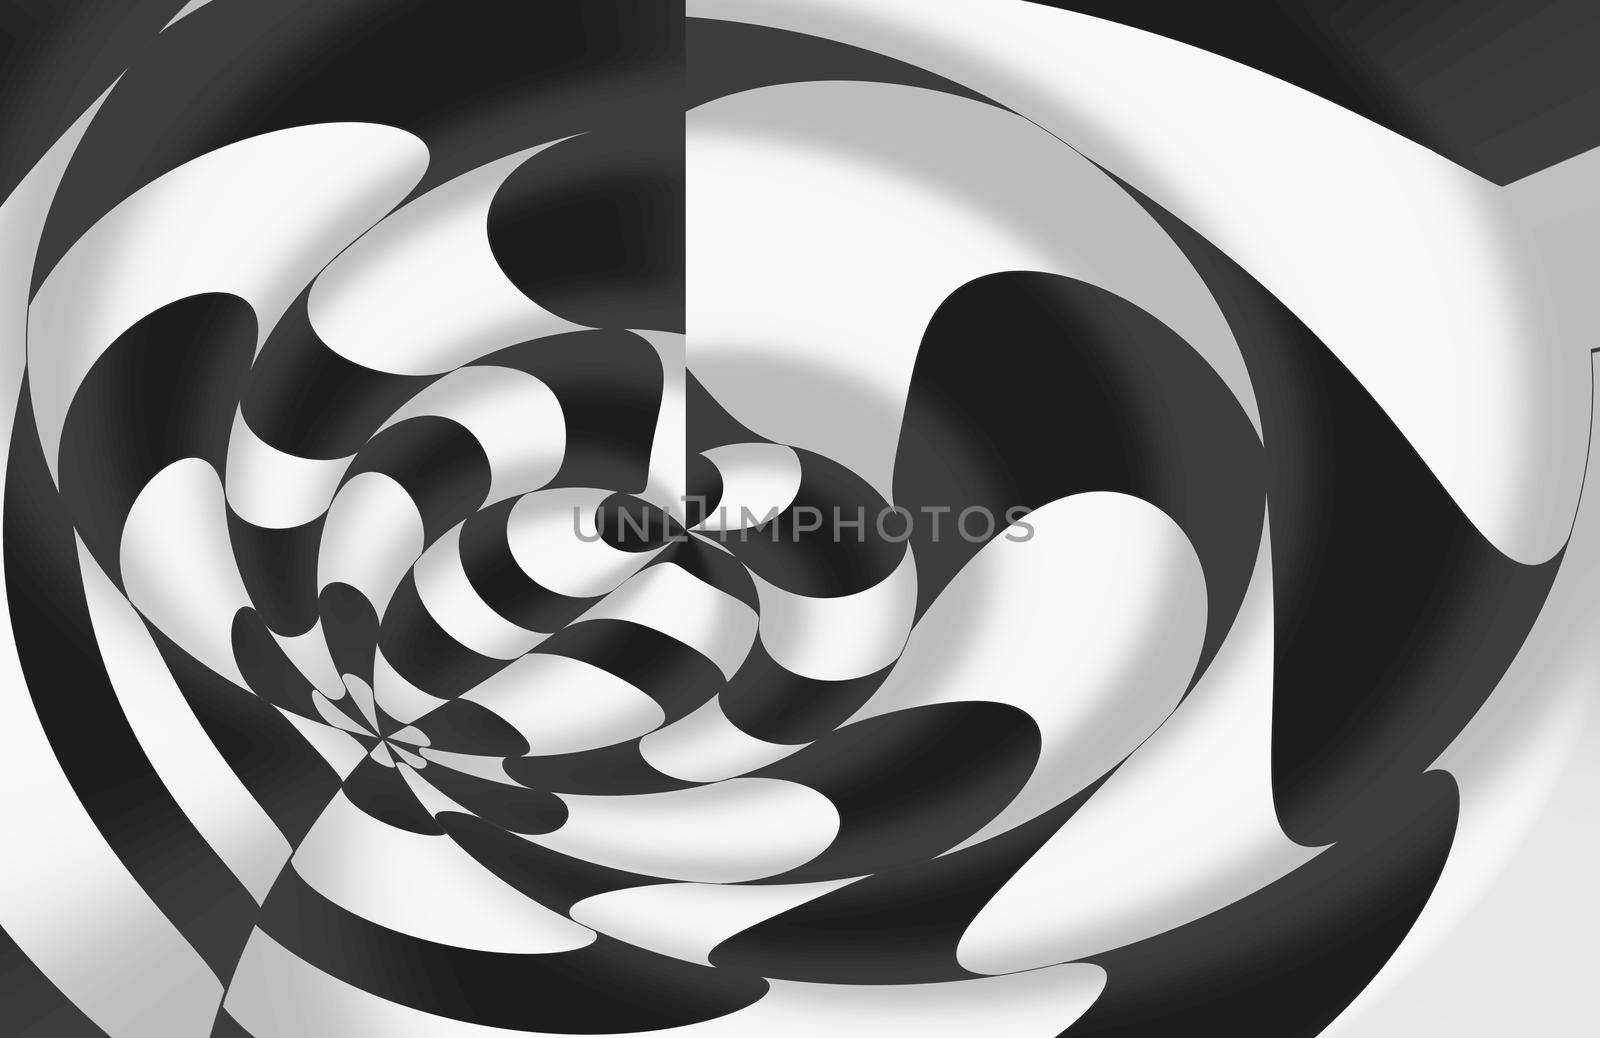 3d drawing of striped cones. Volumetric pattern of black and white striped cones. Geometric abstract pattern.